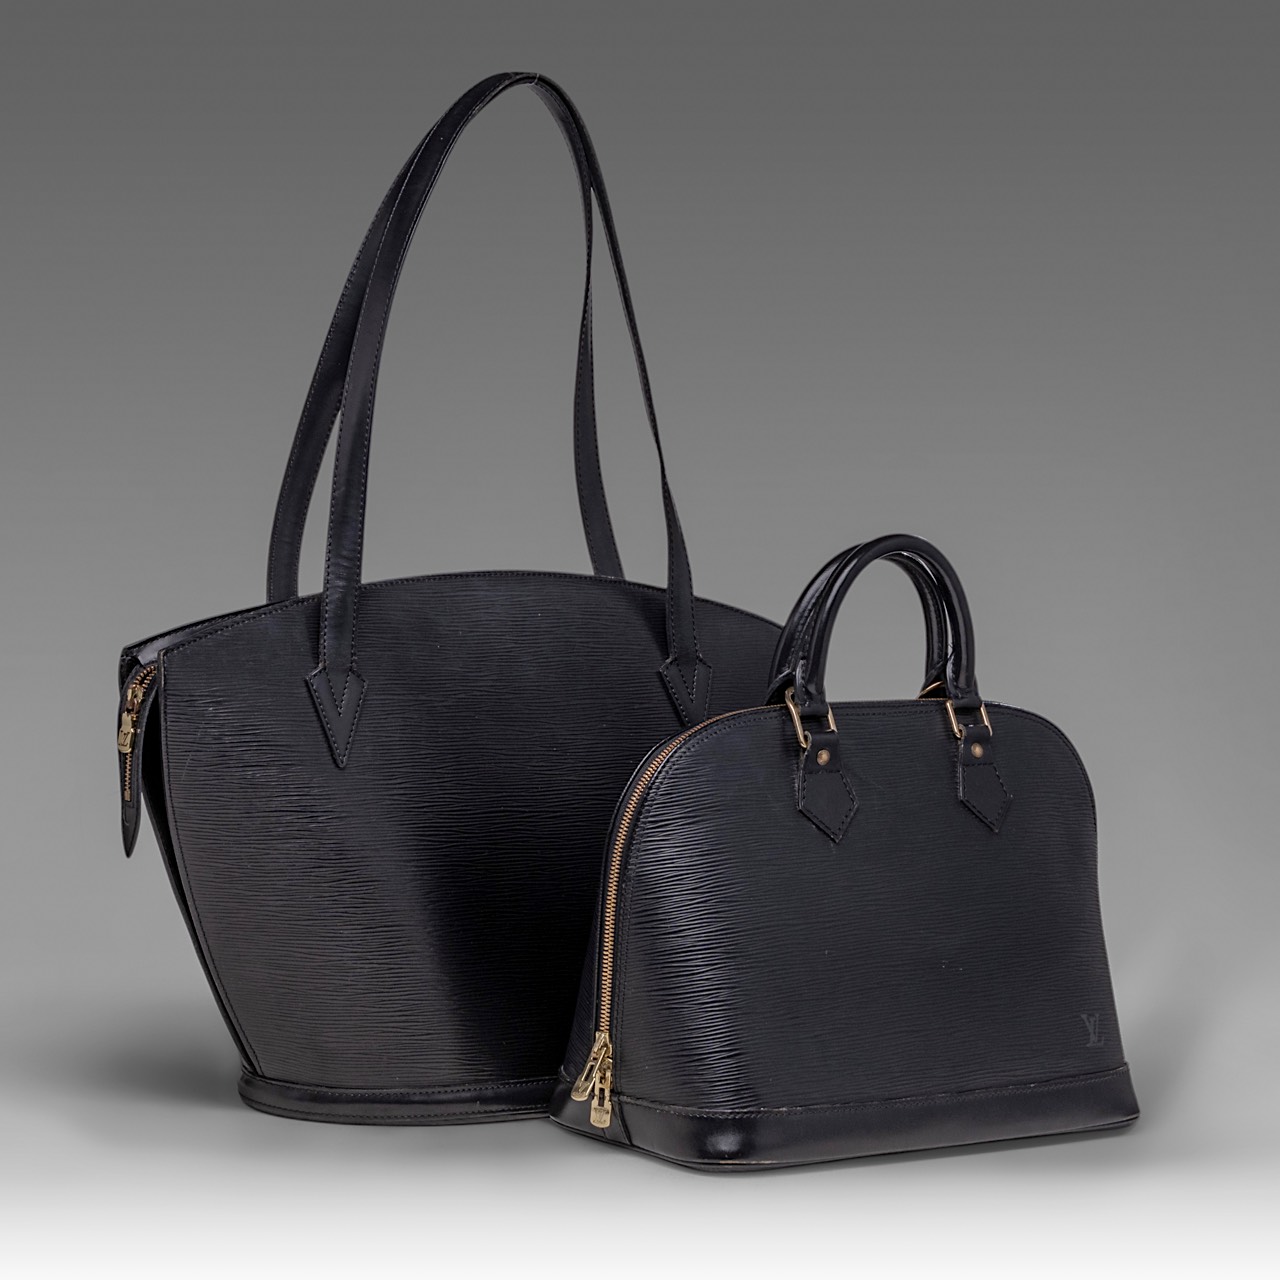 Two various Louis Vuitton handbags in black epi leather - Image 2 of 22